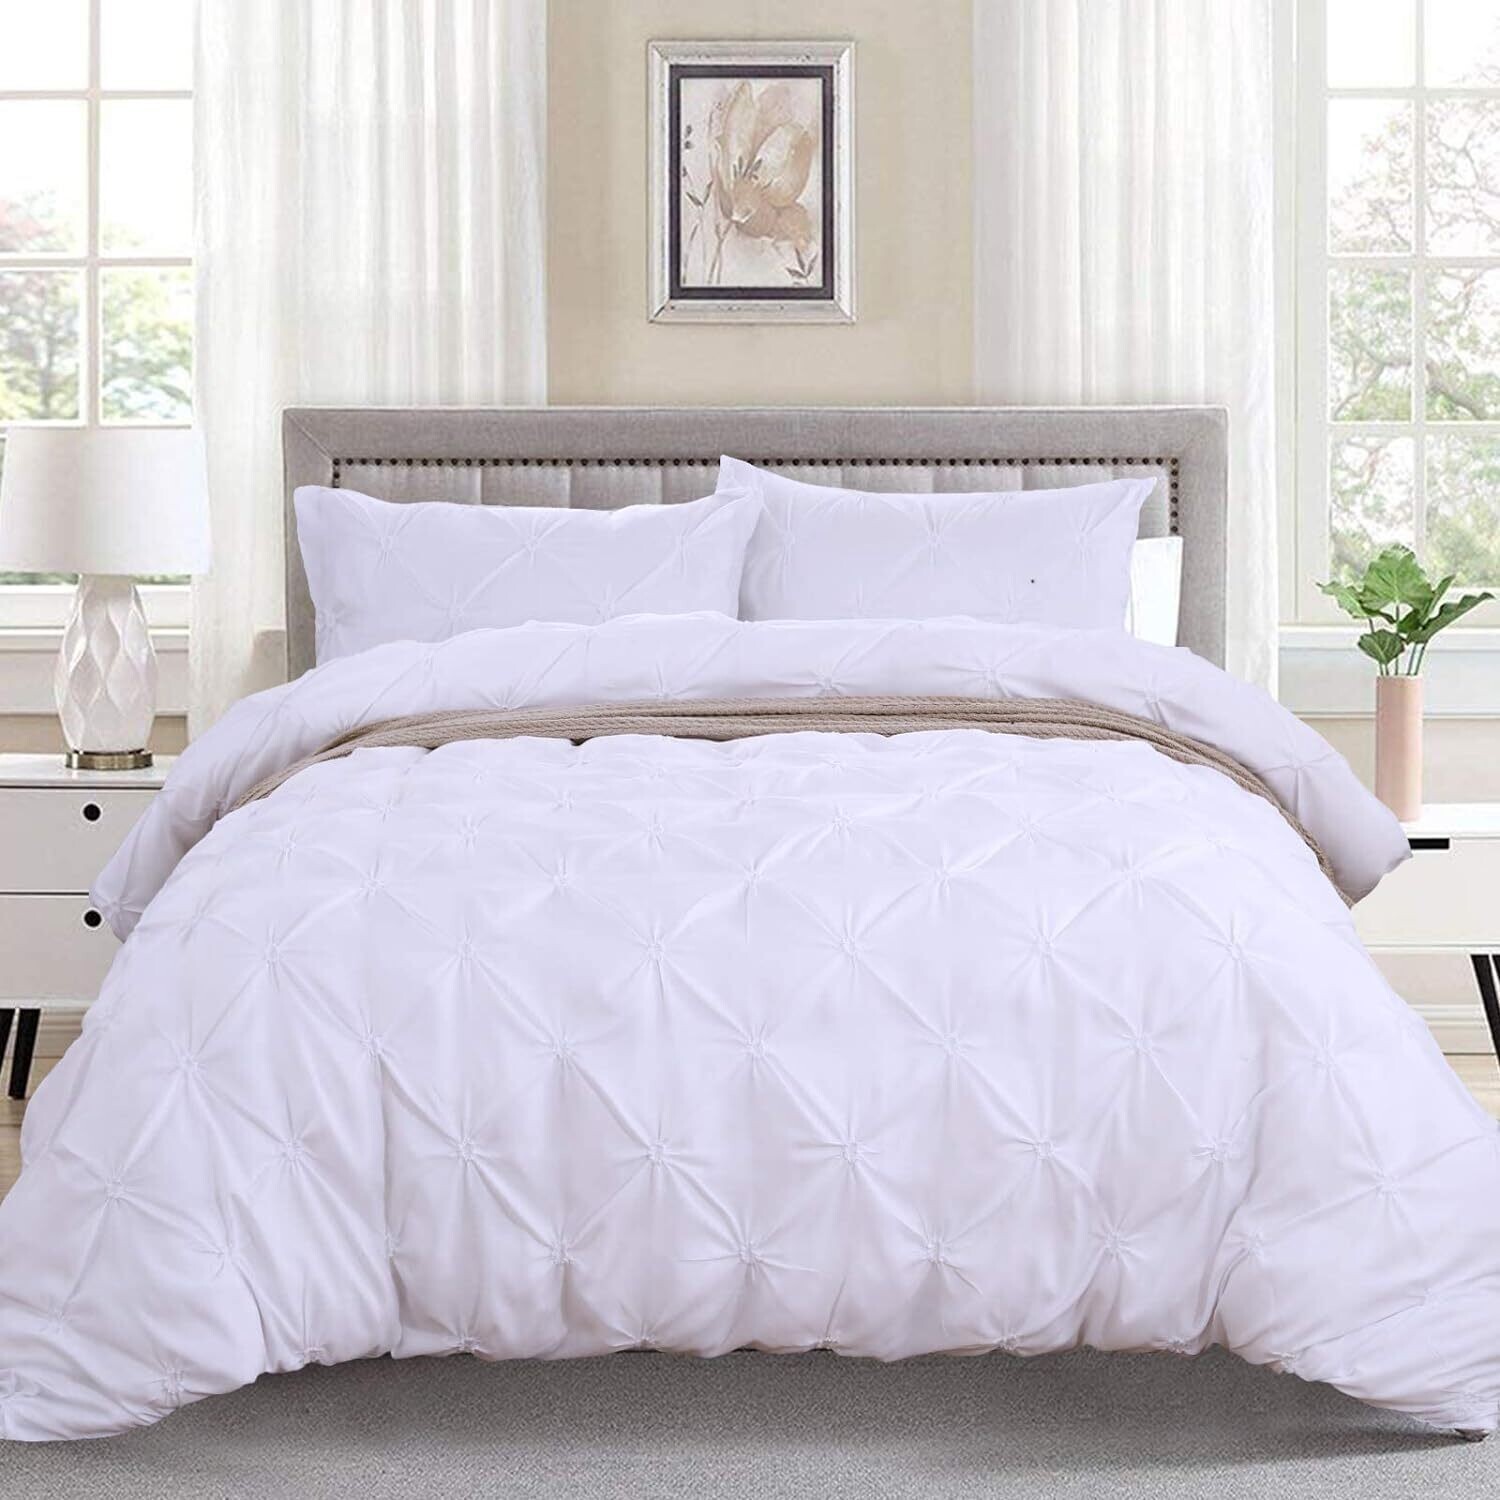 Luxury White Pintuck Duvet Cover King Size 3 Pieces Pinch Pleat Bedding Duvet Cover with Zipper Closure, Soft Microfiber